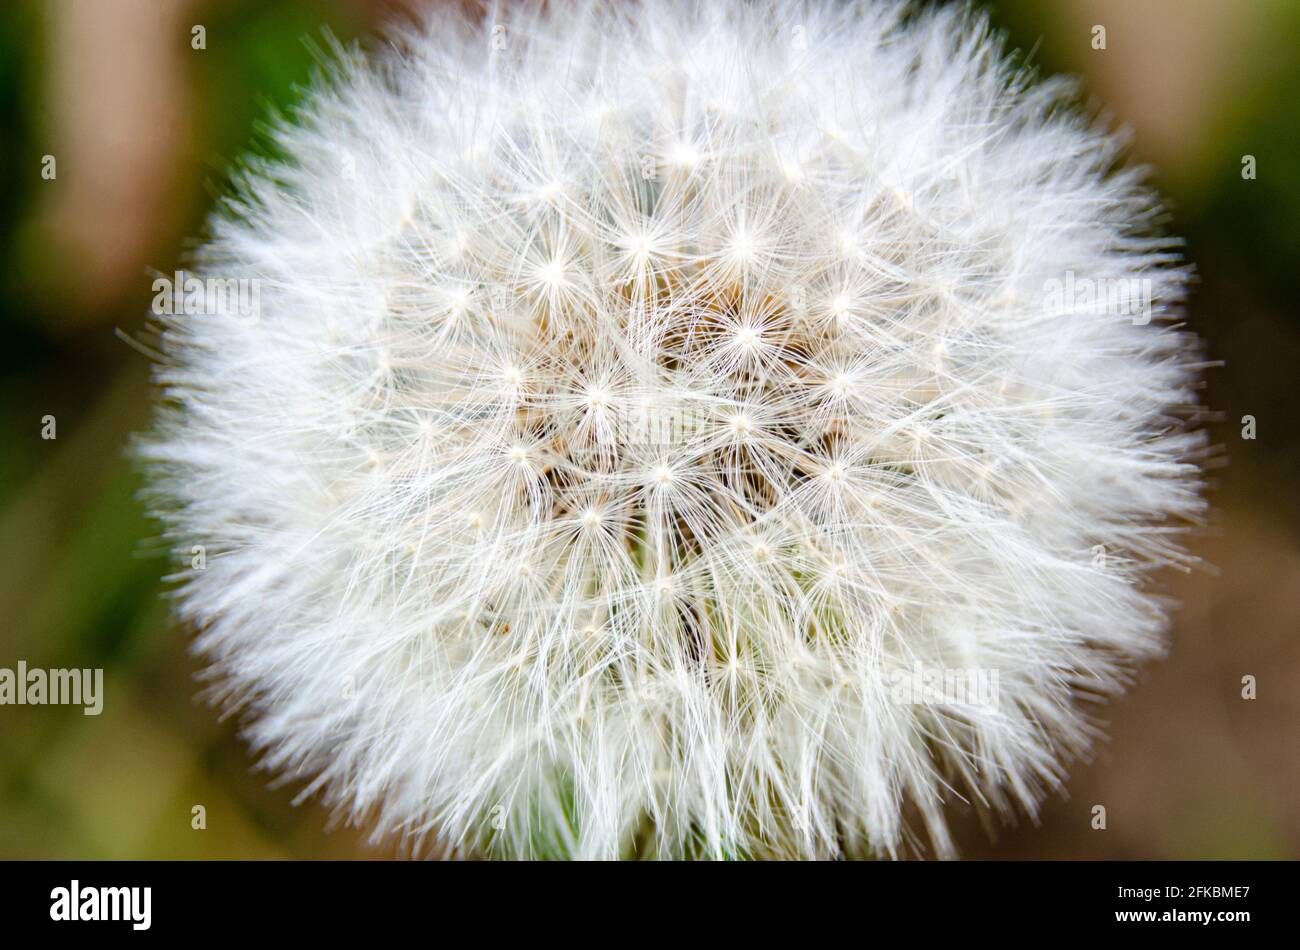 Close up view of a dandelion (or taraxacom the latin name) seed head with seeds attached to fluffy white parachutes. Stock Photo